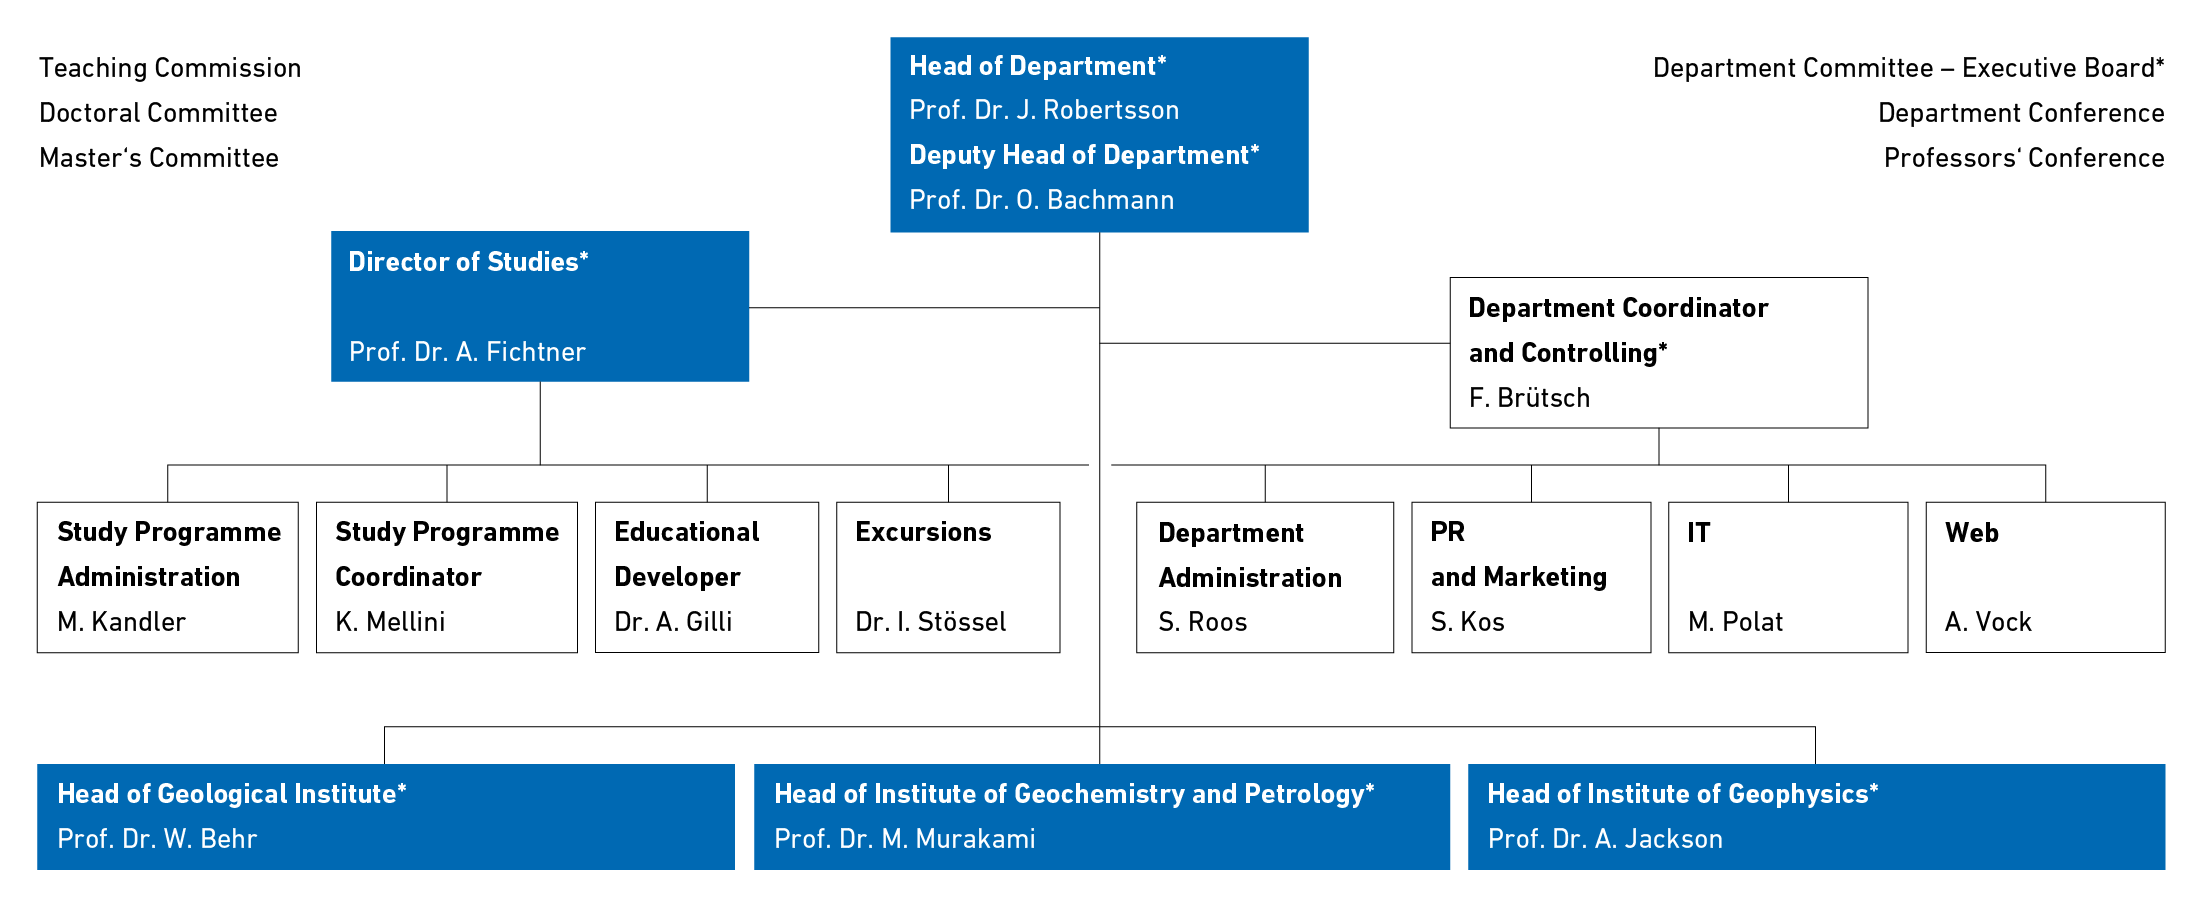 D-ERDW organisational chart with Executive Board and Department Administration